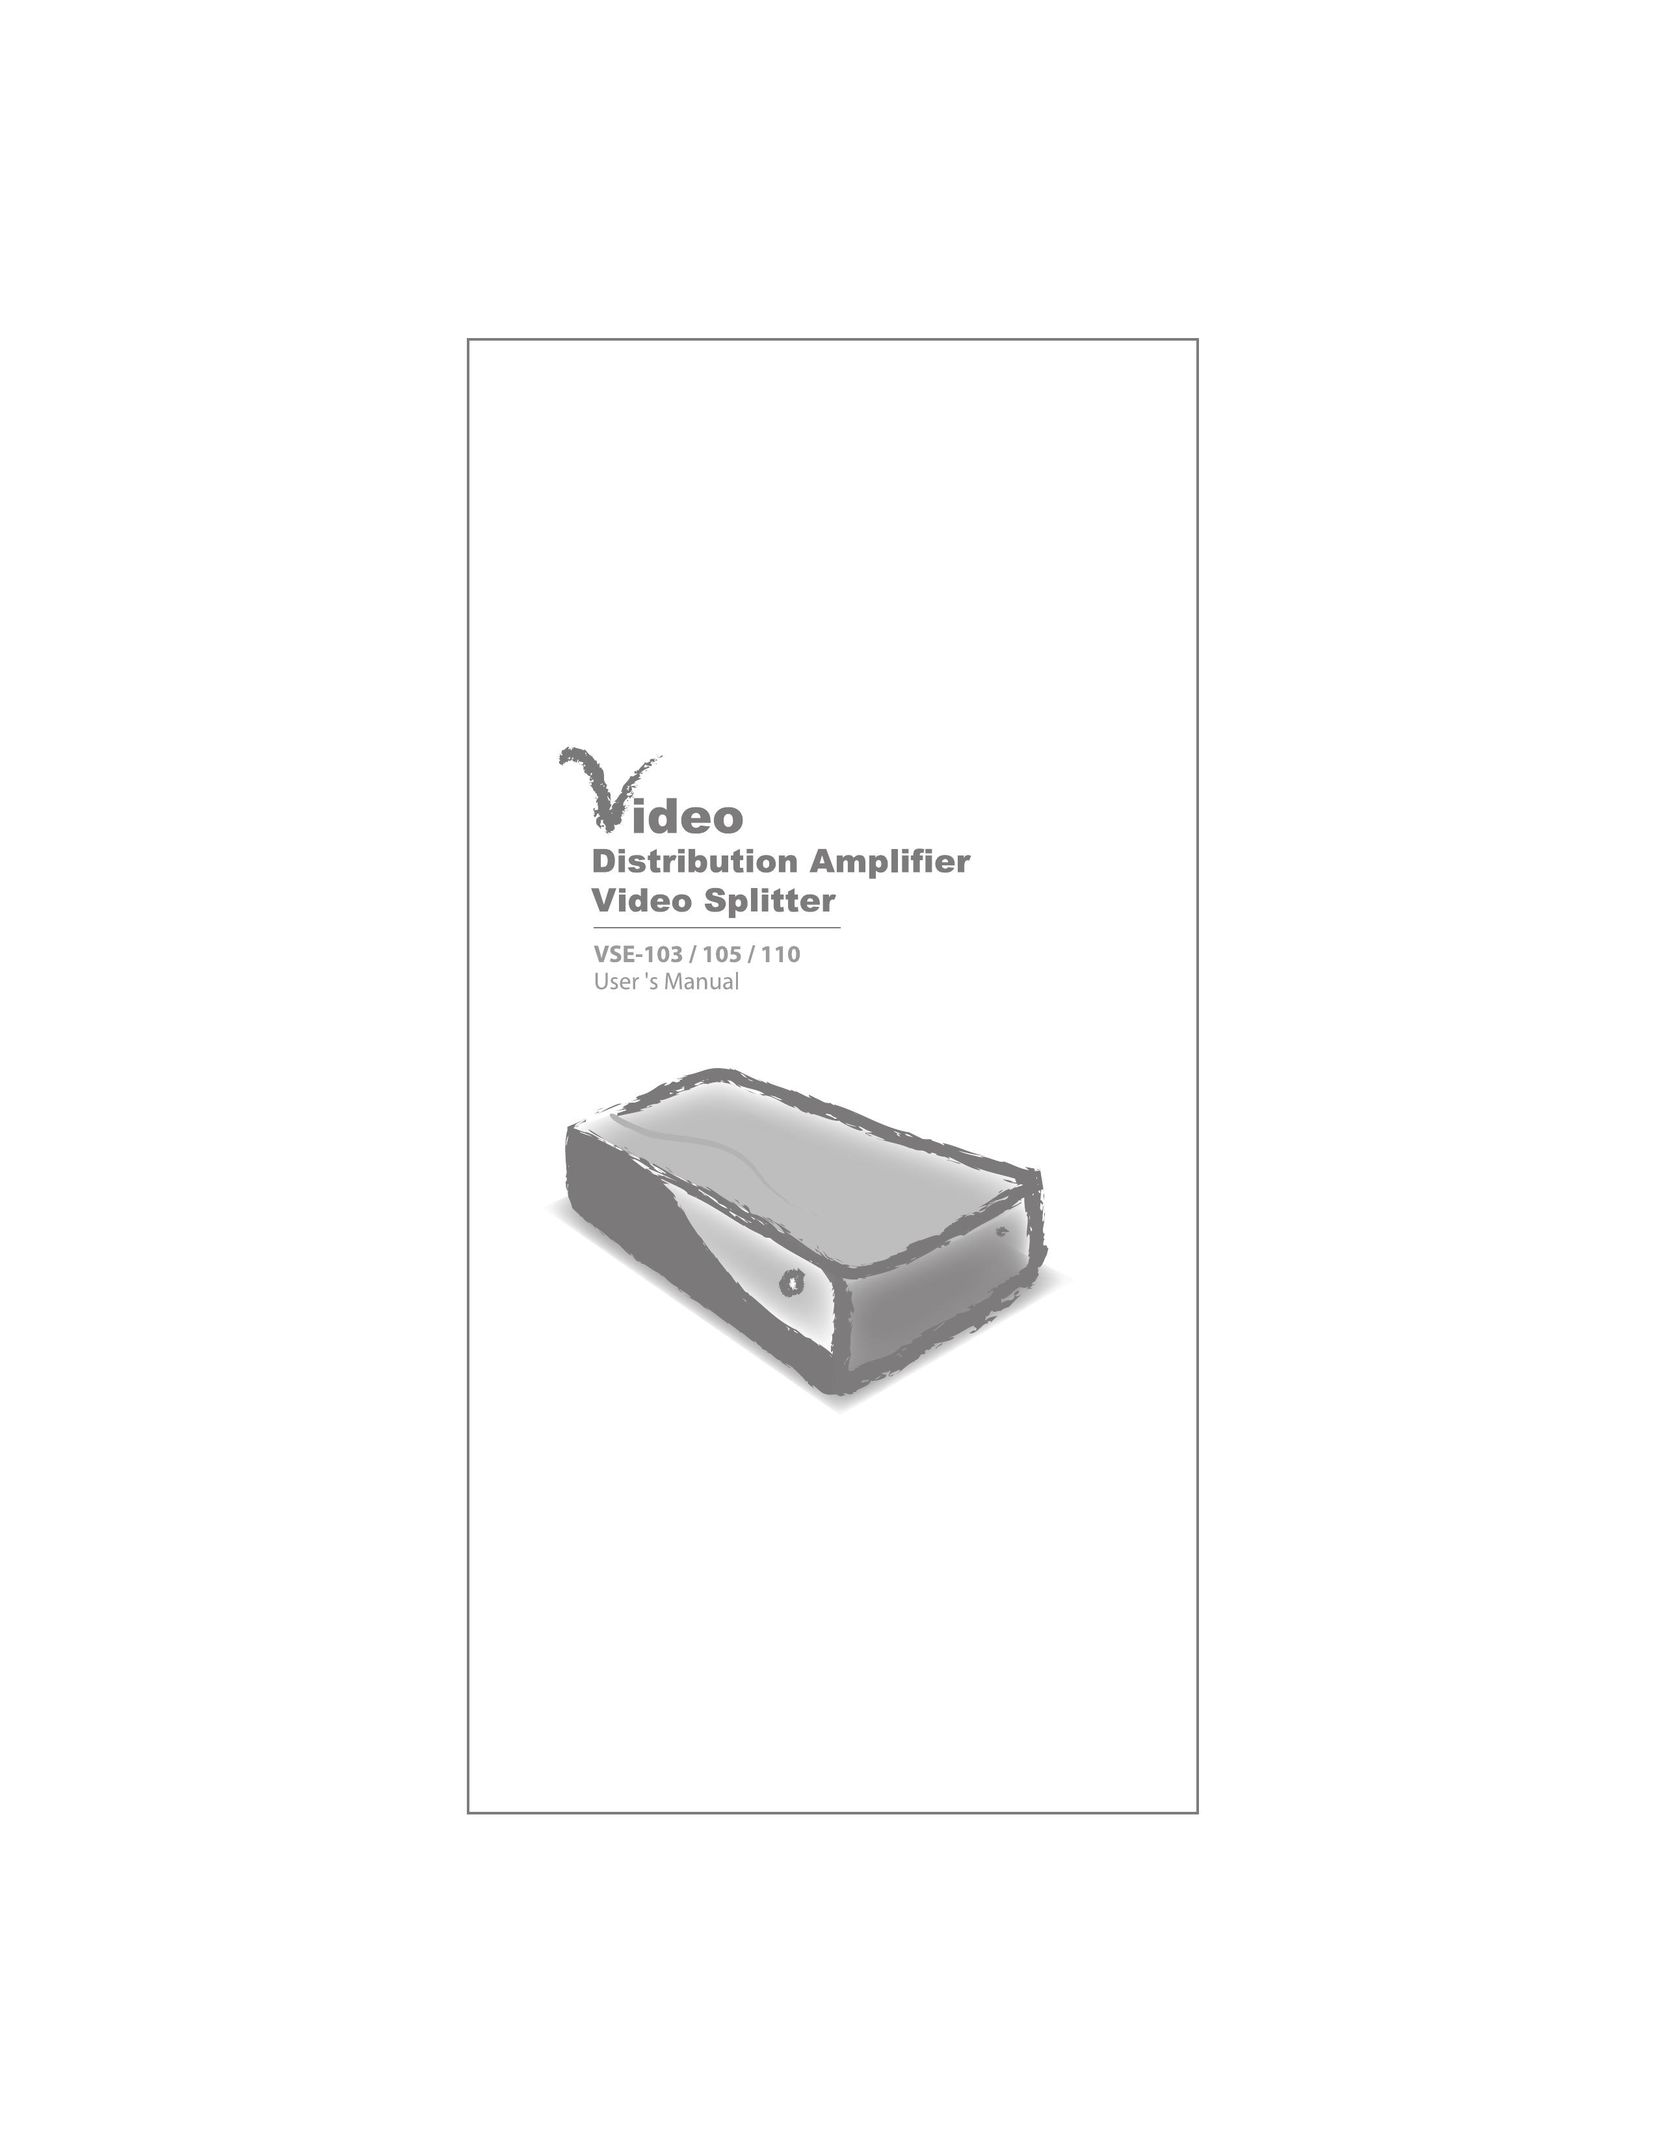 ConnectPRO VSE103A Switch User Manual